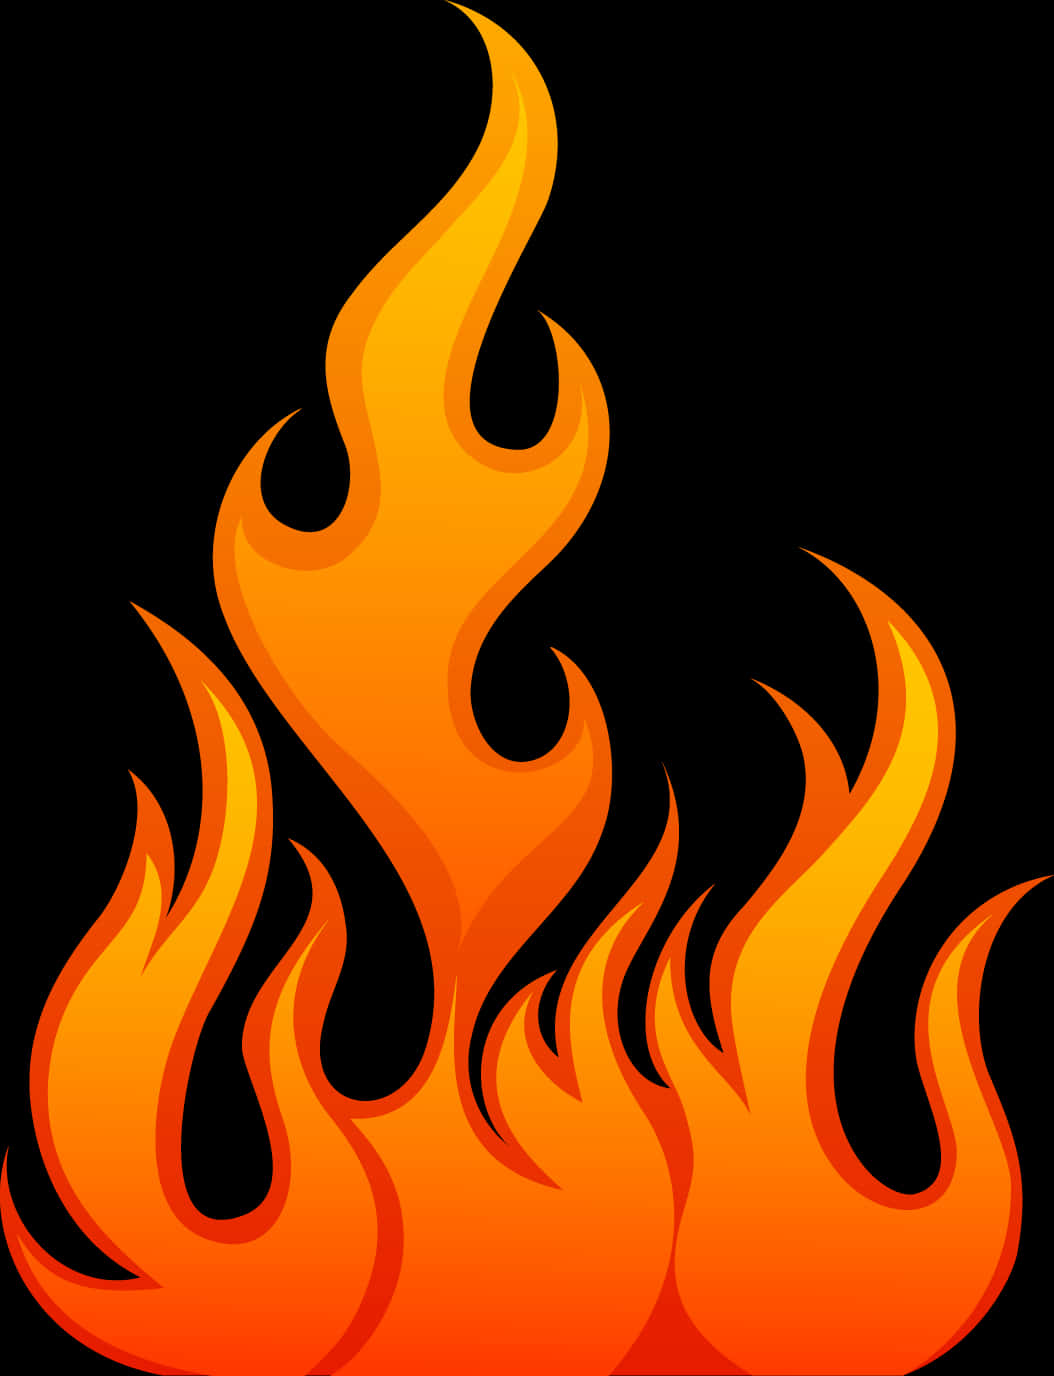 Vibrant Flame Graphic PNG